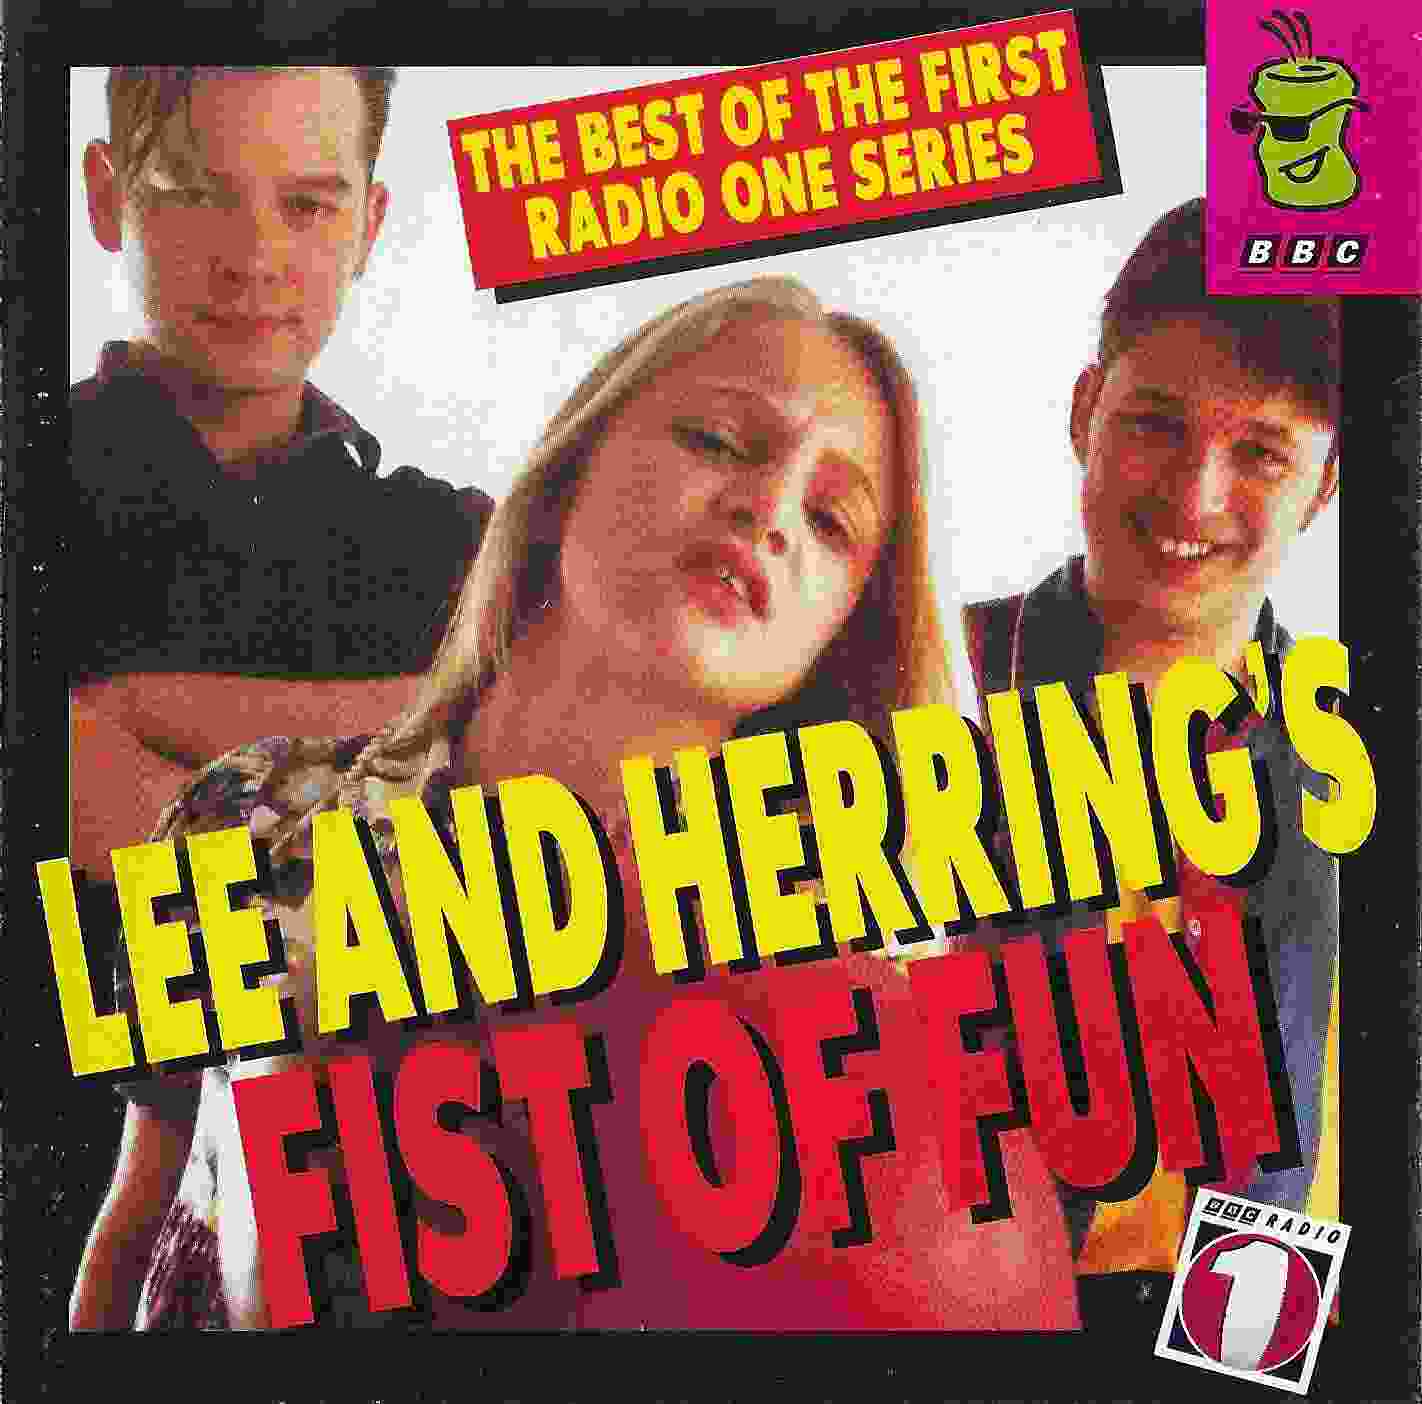 Picture of Fist of fun by artist Lee / Herring from the BBC cds - Records and Tapes library